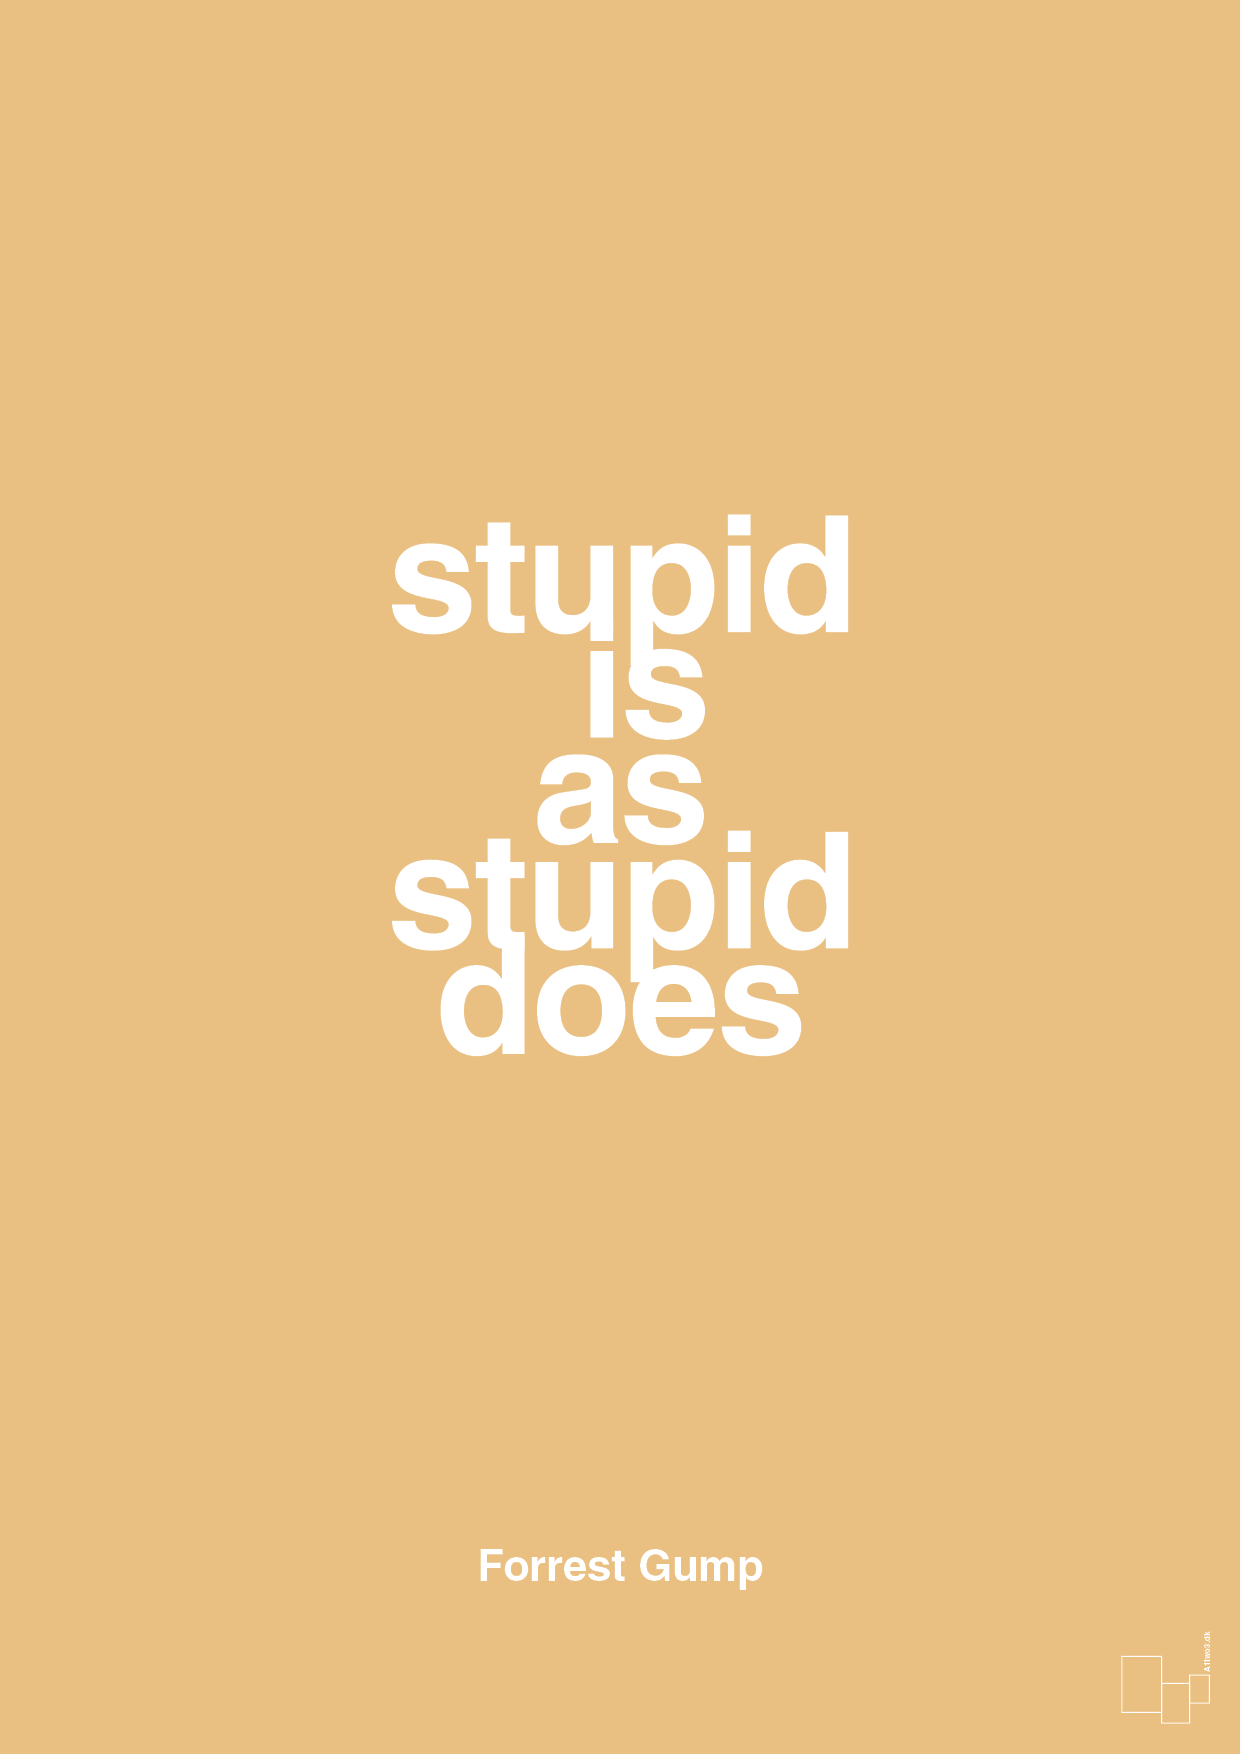 stupid is as stupid does - Plakat med Citater i Charismatic